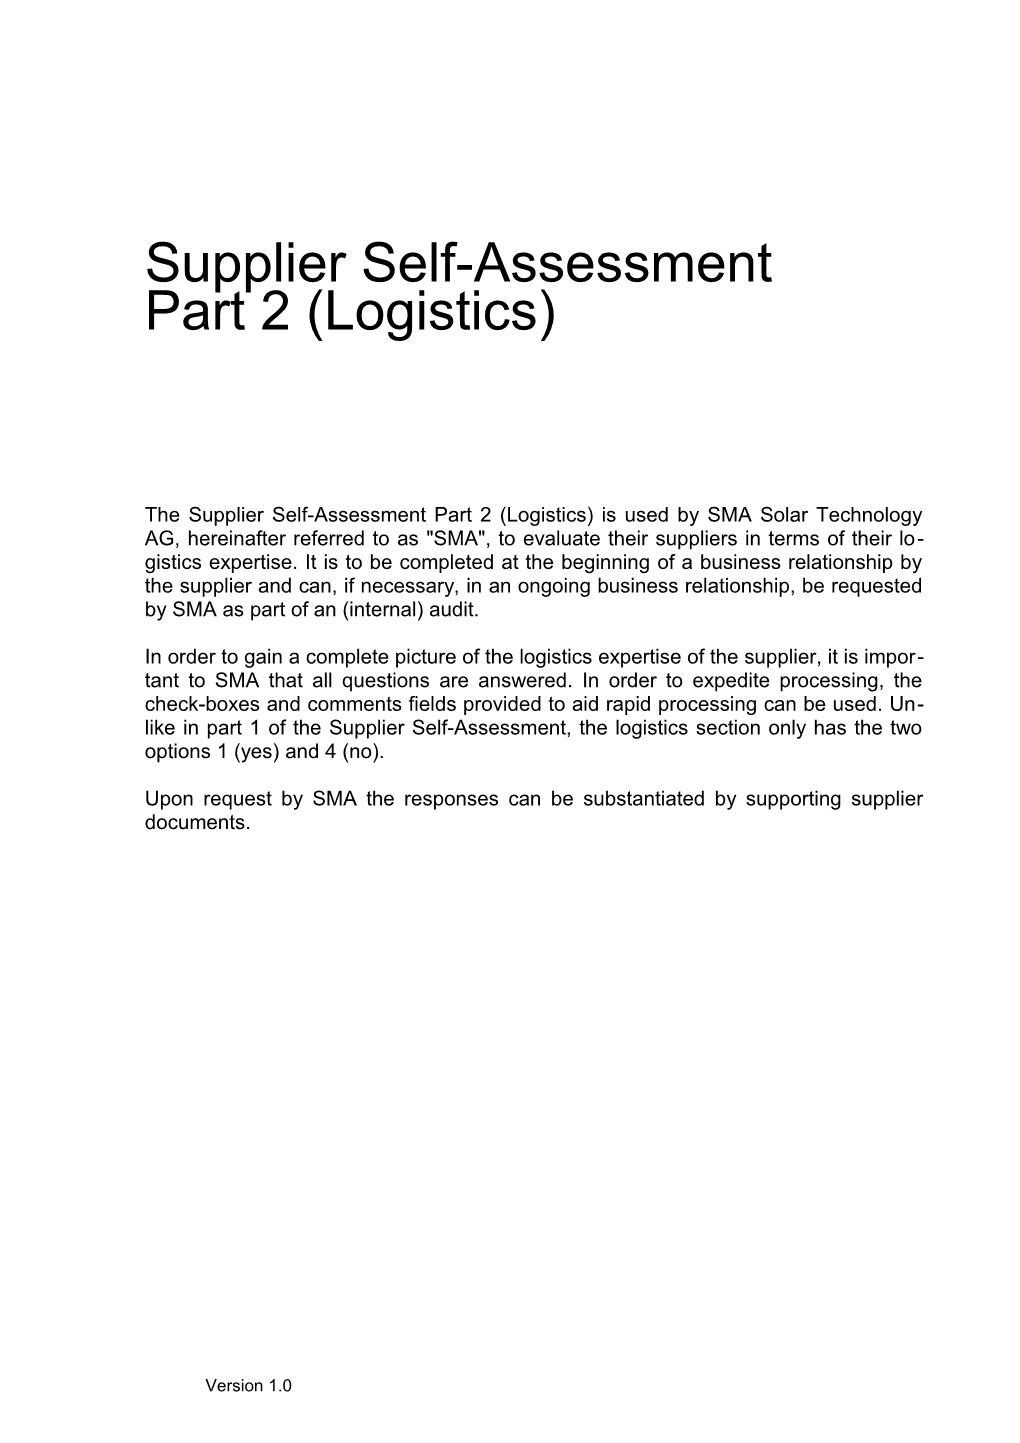 Upon Request by SMA the Responses Can Be Substantiated by Supporting Supplier Documents